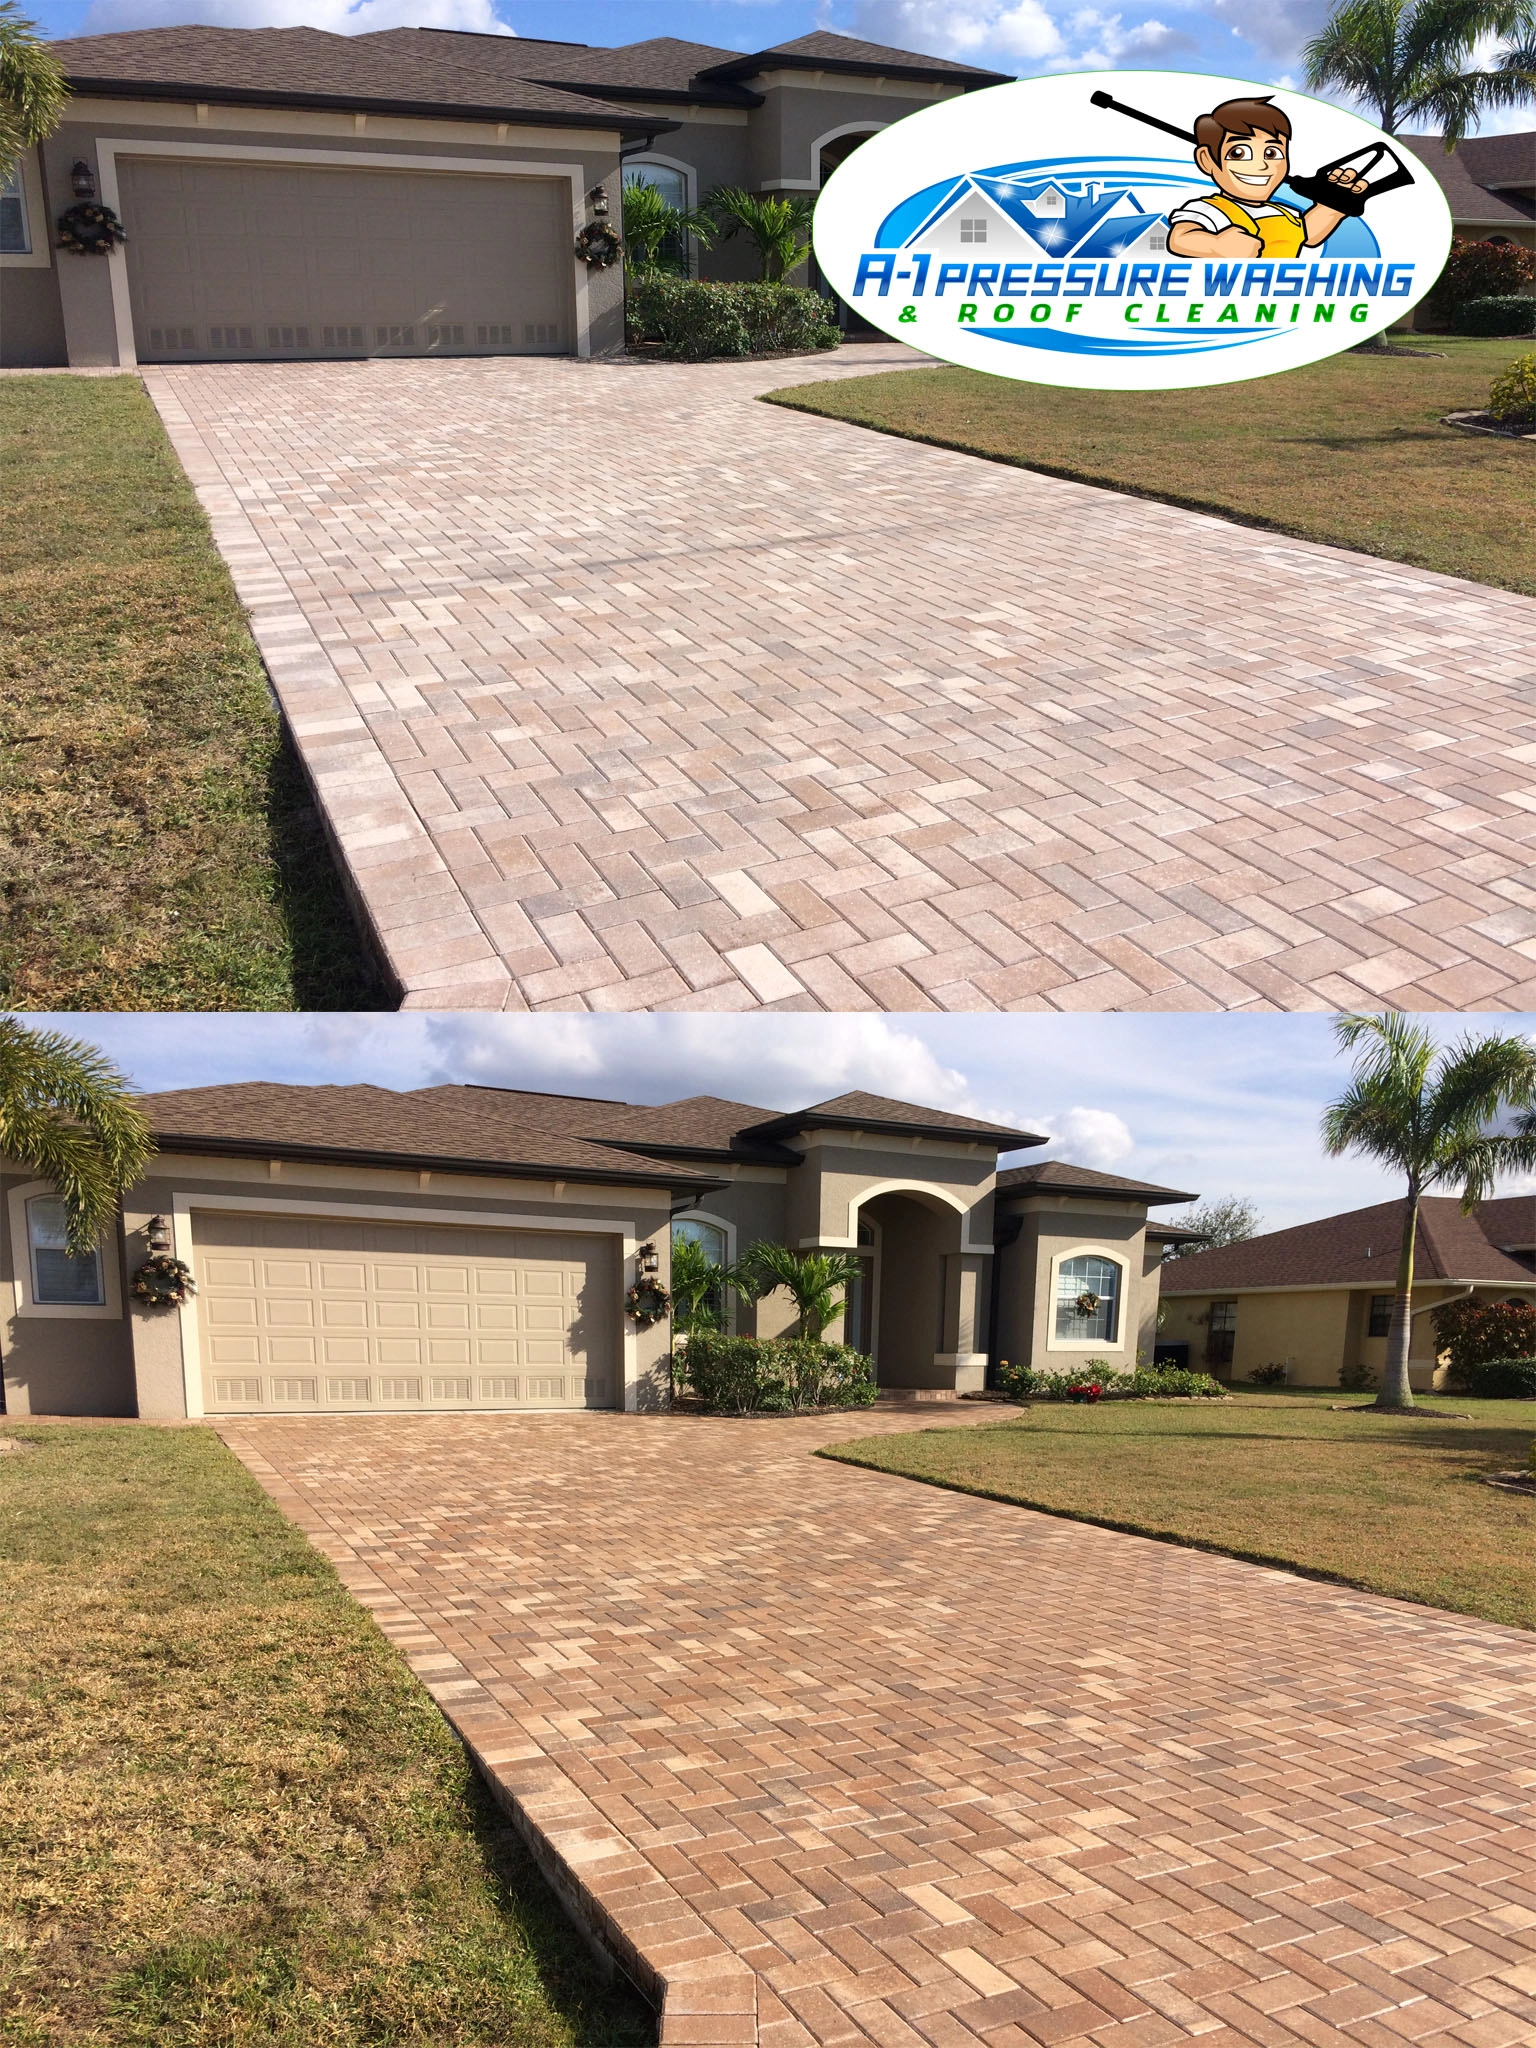 Paver Sealing Services, Before & After | A-1 Pressure Washing & Roof Cleaning